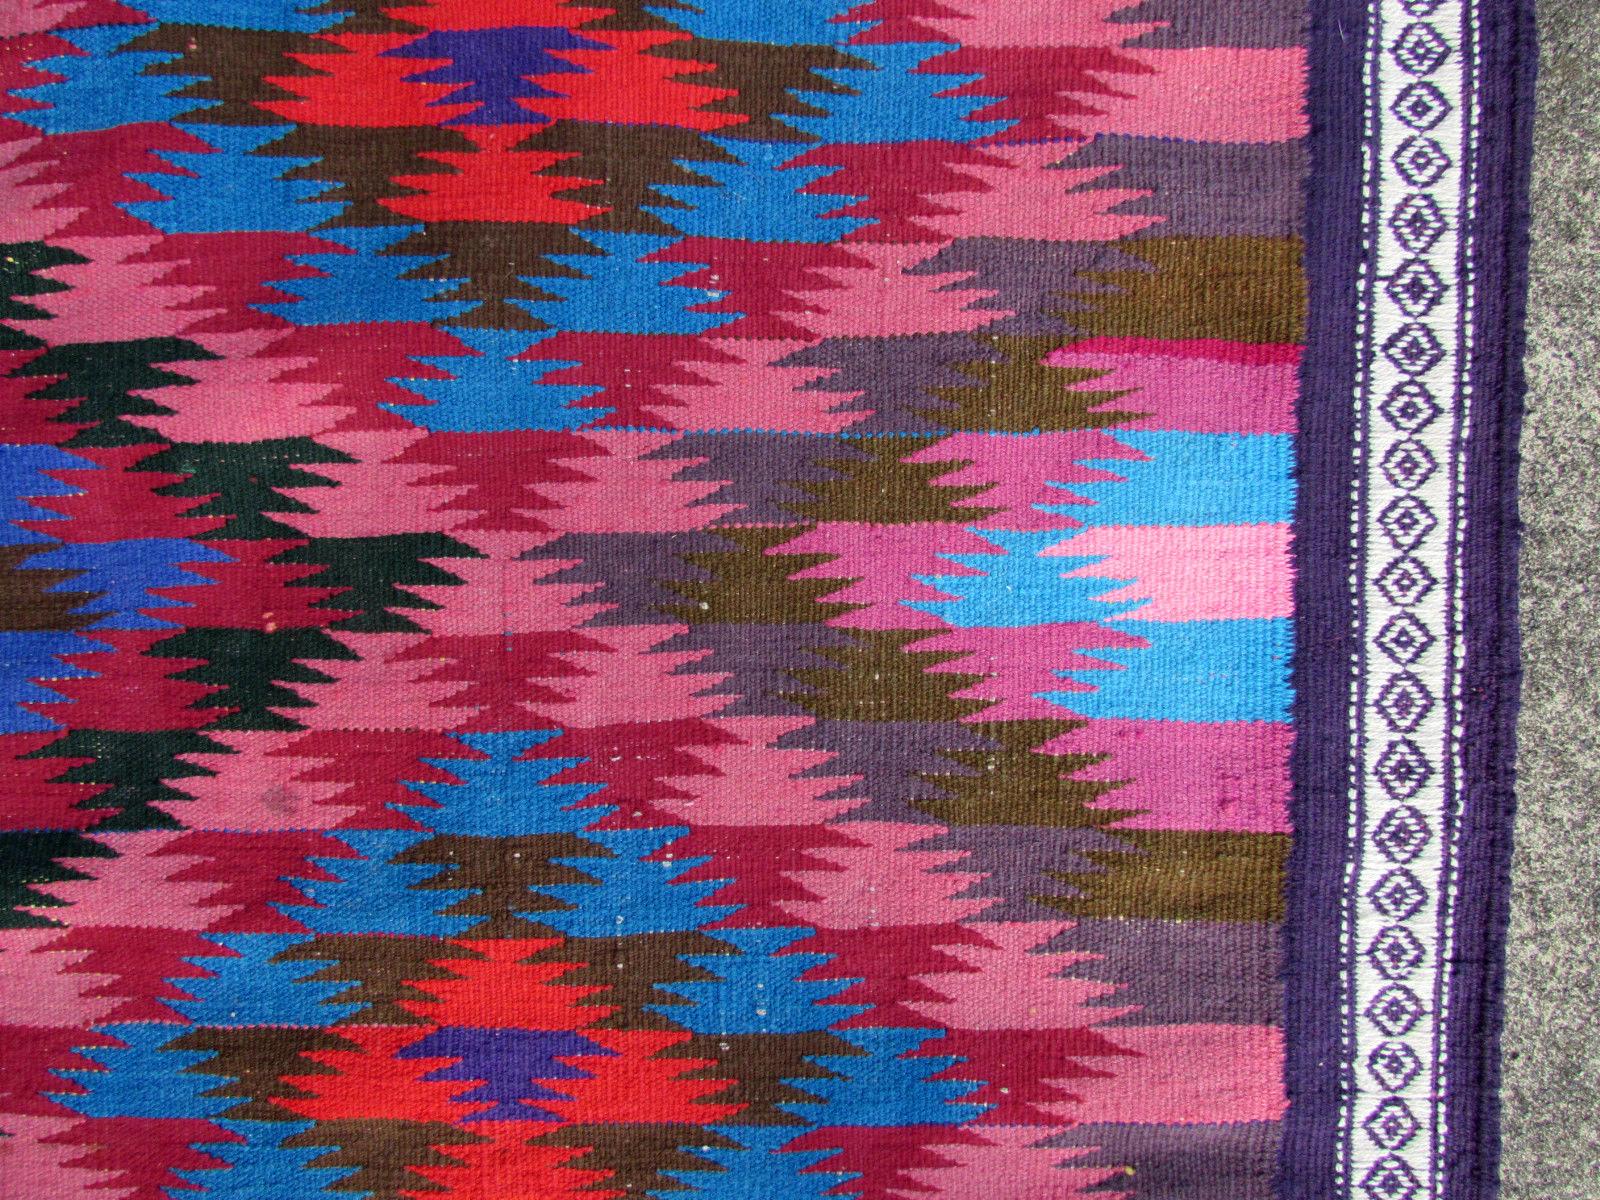 Handmade vintage Ardabil flat-weave in wool. The rug is from the end of 20th century in original good condition. 

- Condition: original good,

- circa: 1970s,

- Size: 3.7' x 7.4' (113cm x 225cm),

- Material: wool,

- Country of origin: